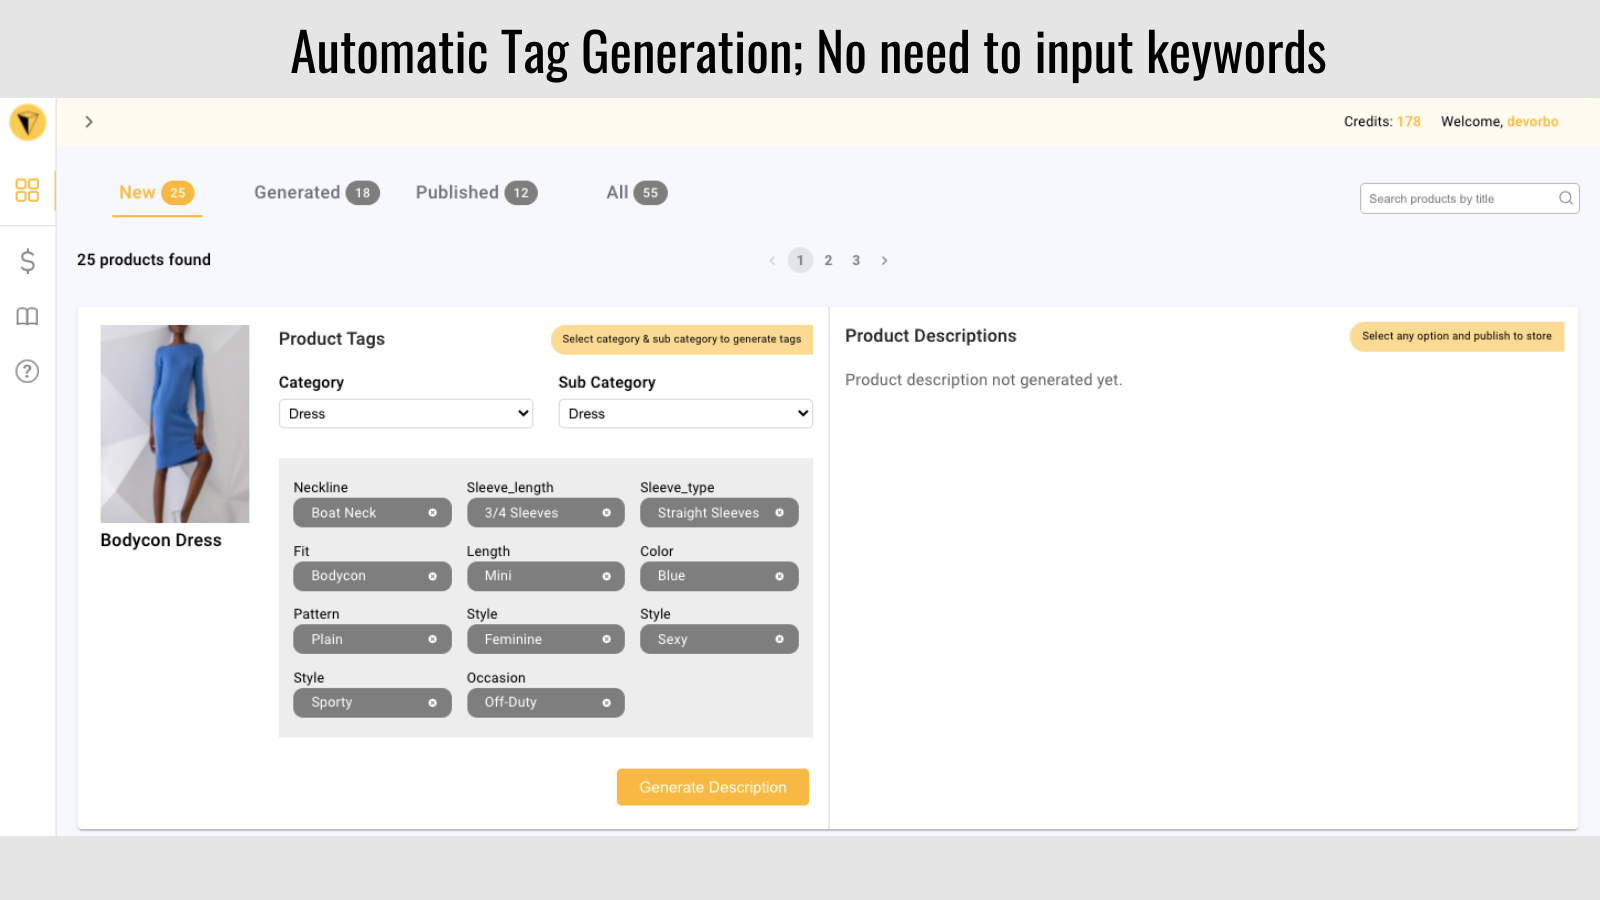 Automated product tags using AI. No need to input keywords